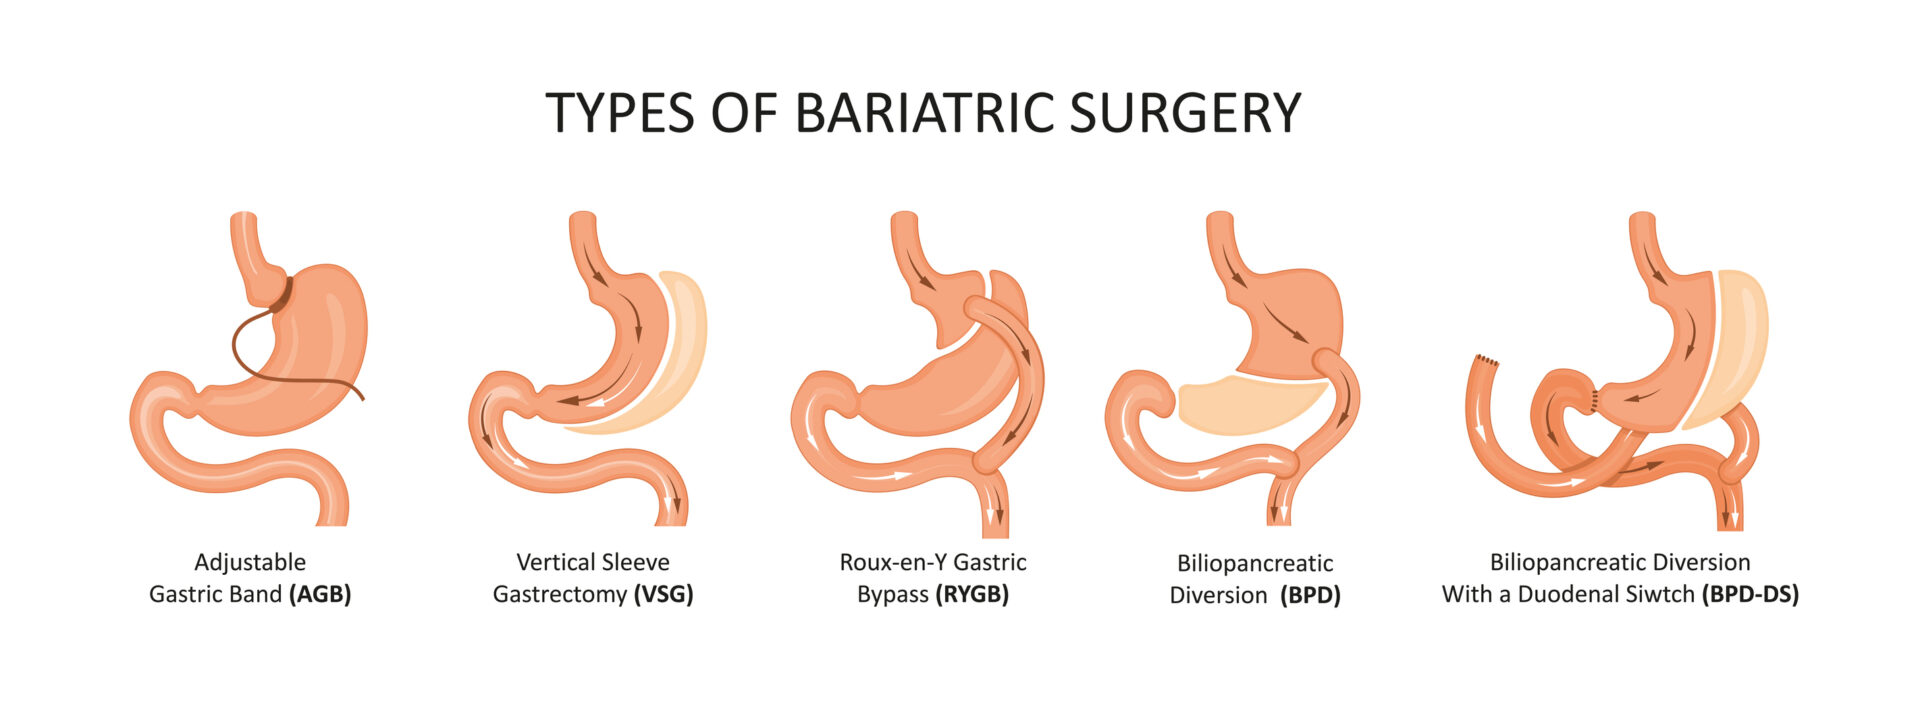 The four types of bariatric surgery include gastric banding, gastric sleeve, gastric bypass and biliary pancreatic diversion.